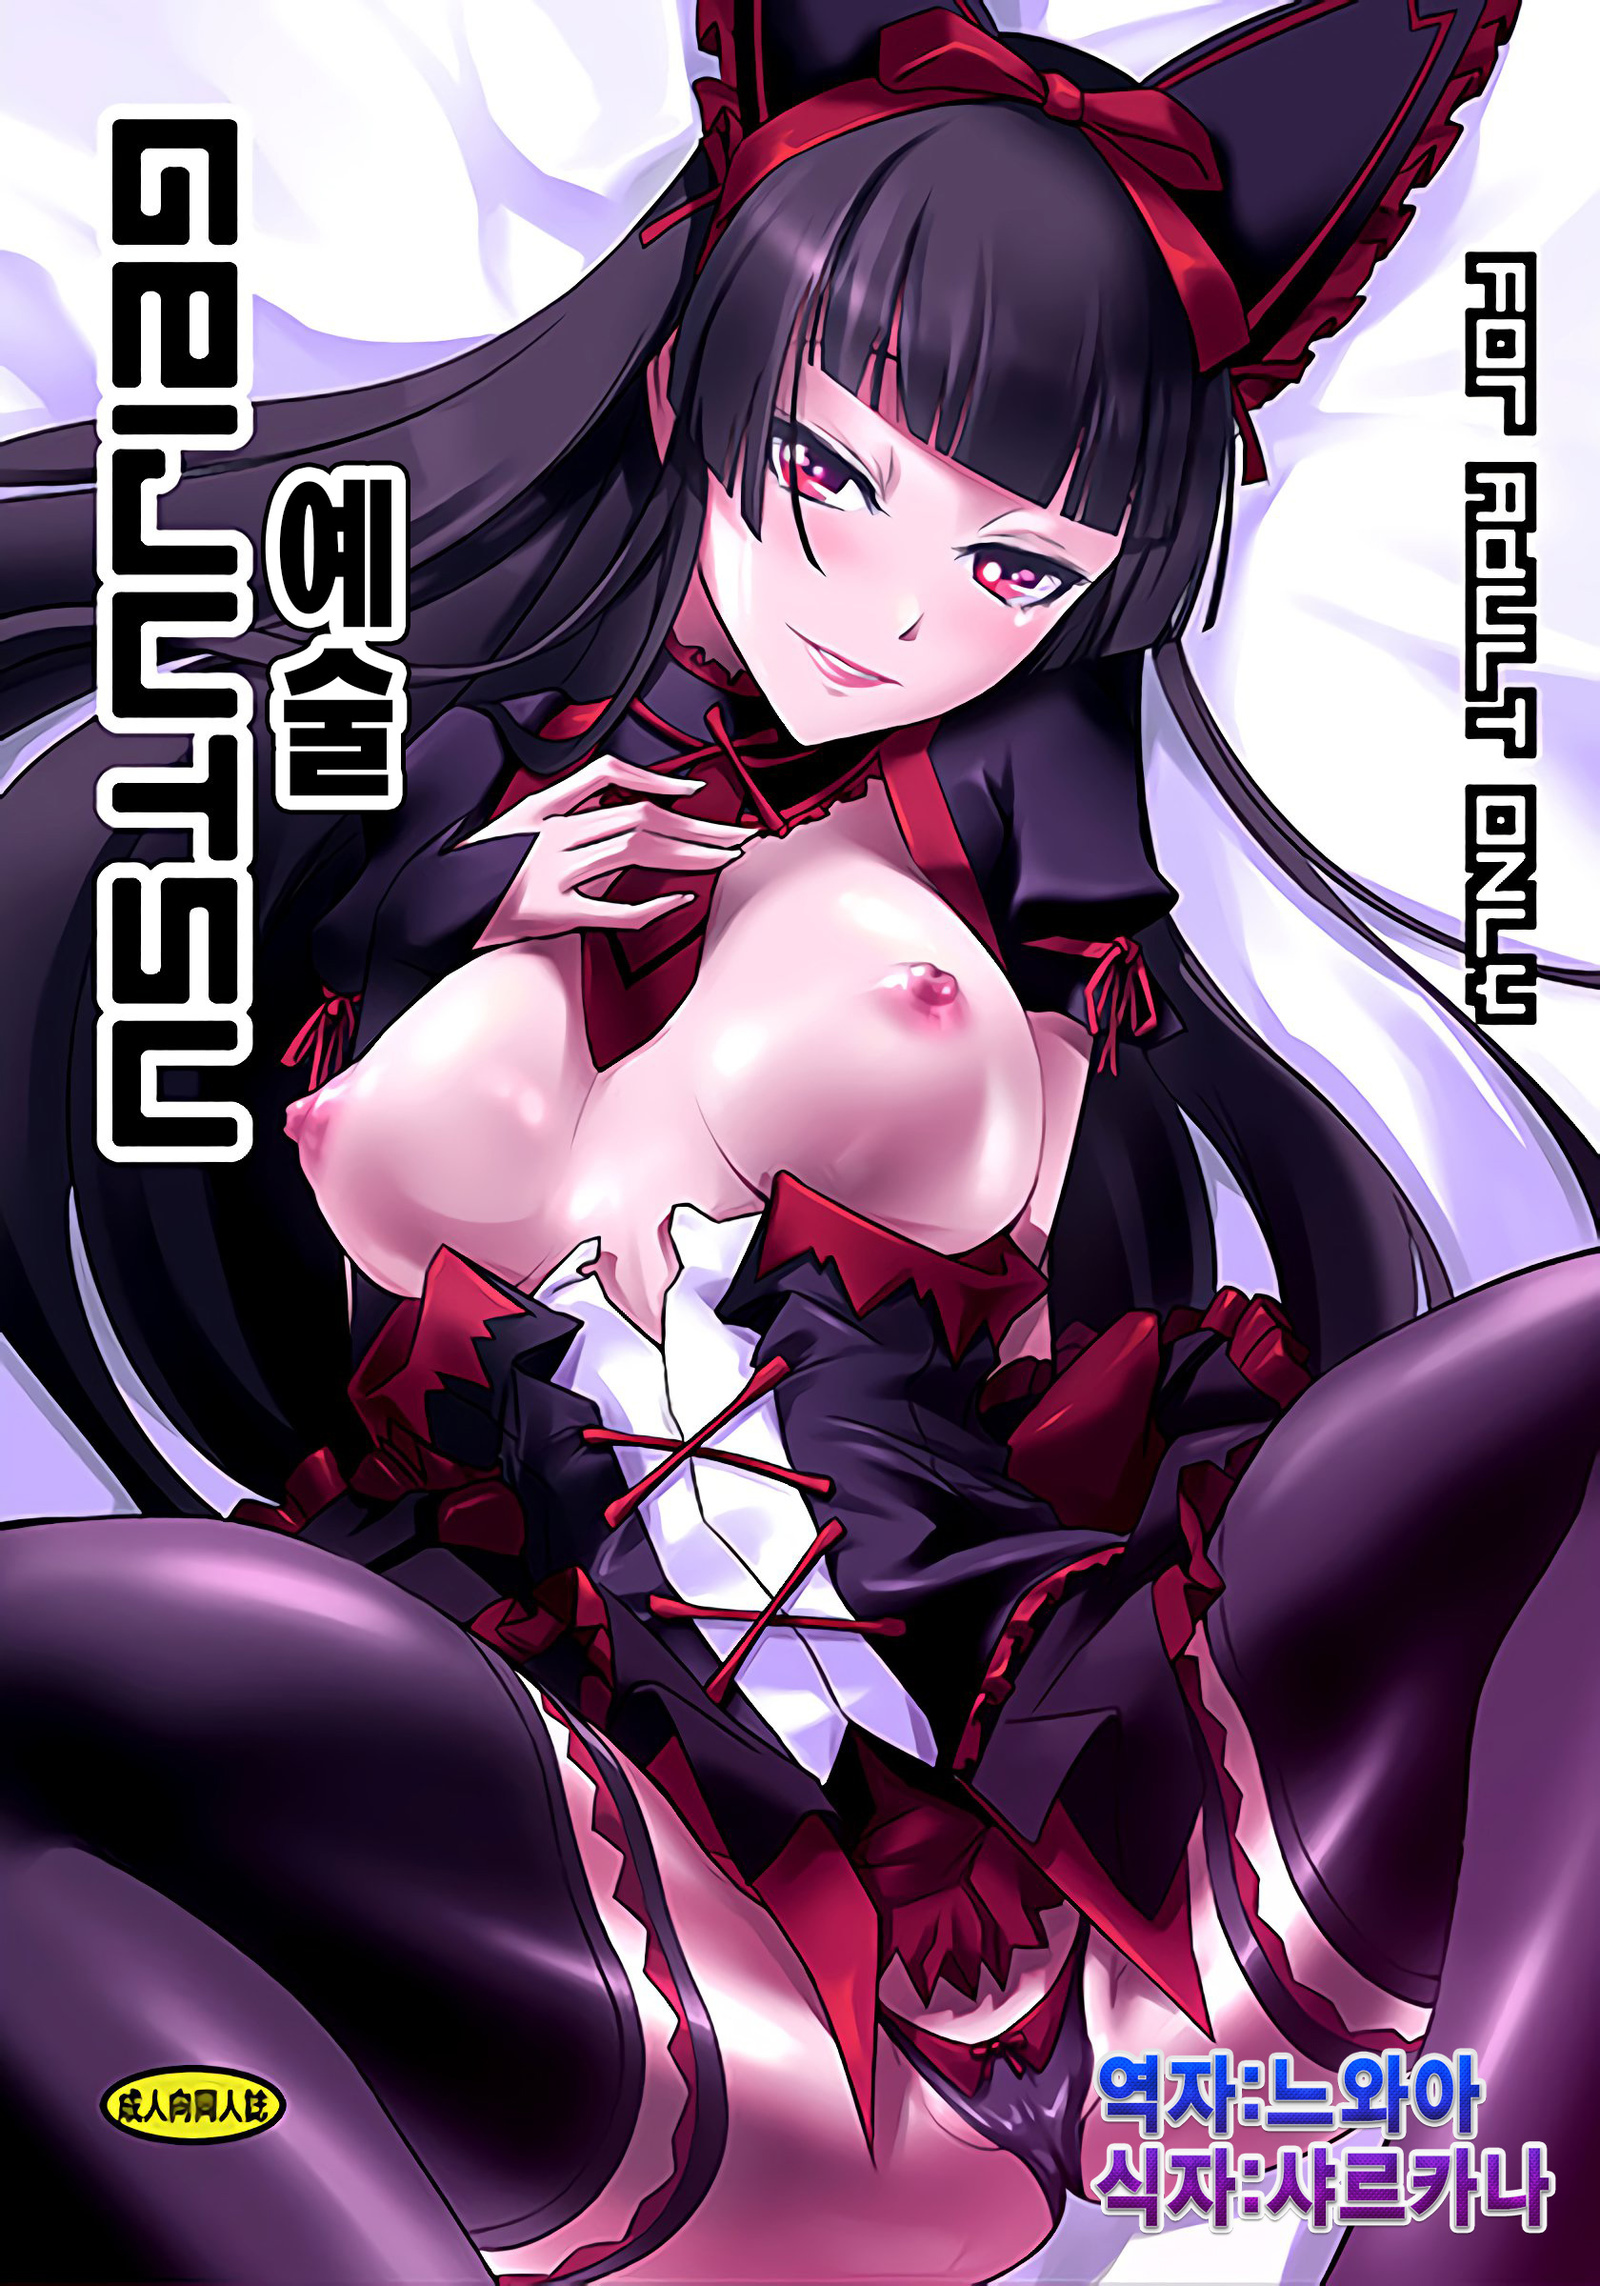 rory mercury - sorted by number of objects - Free Hentai